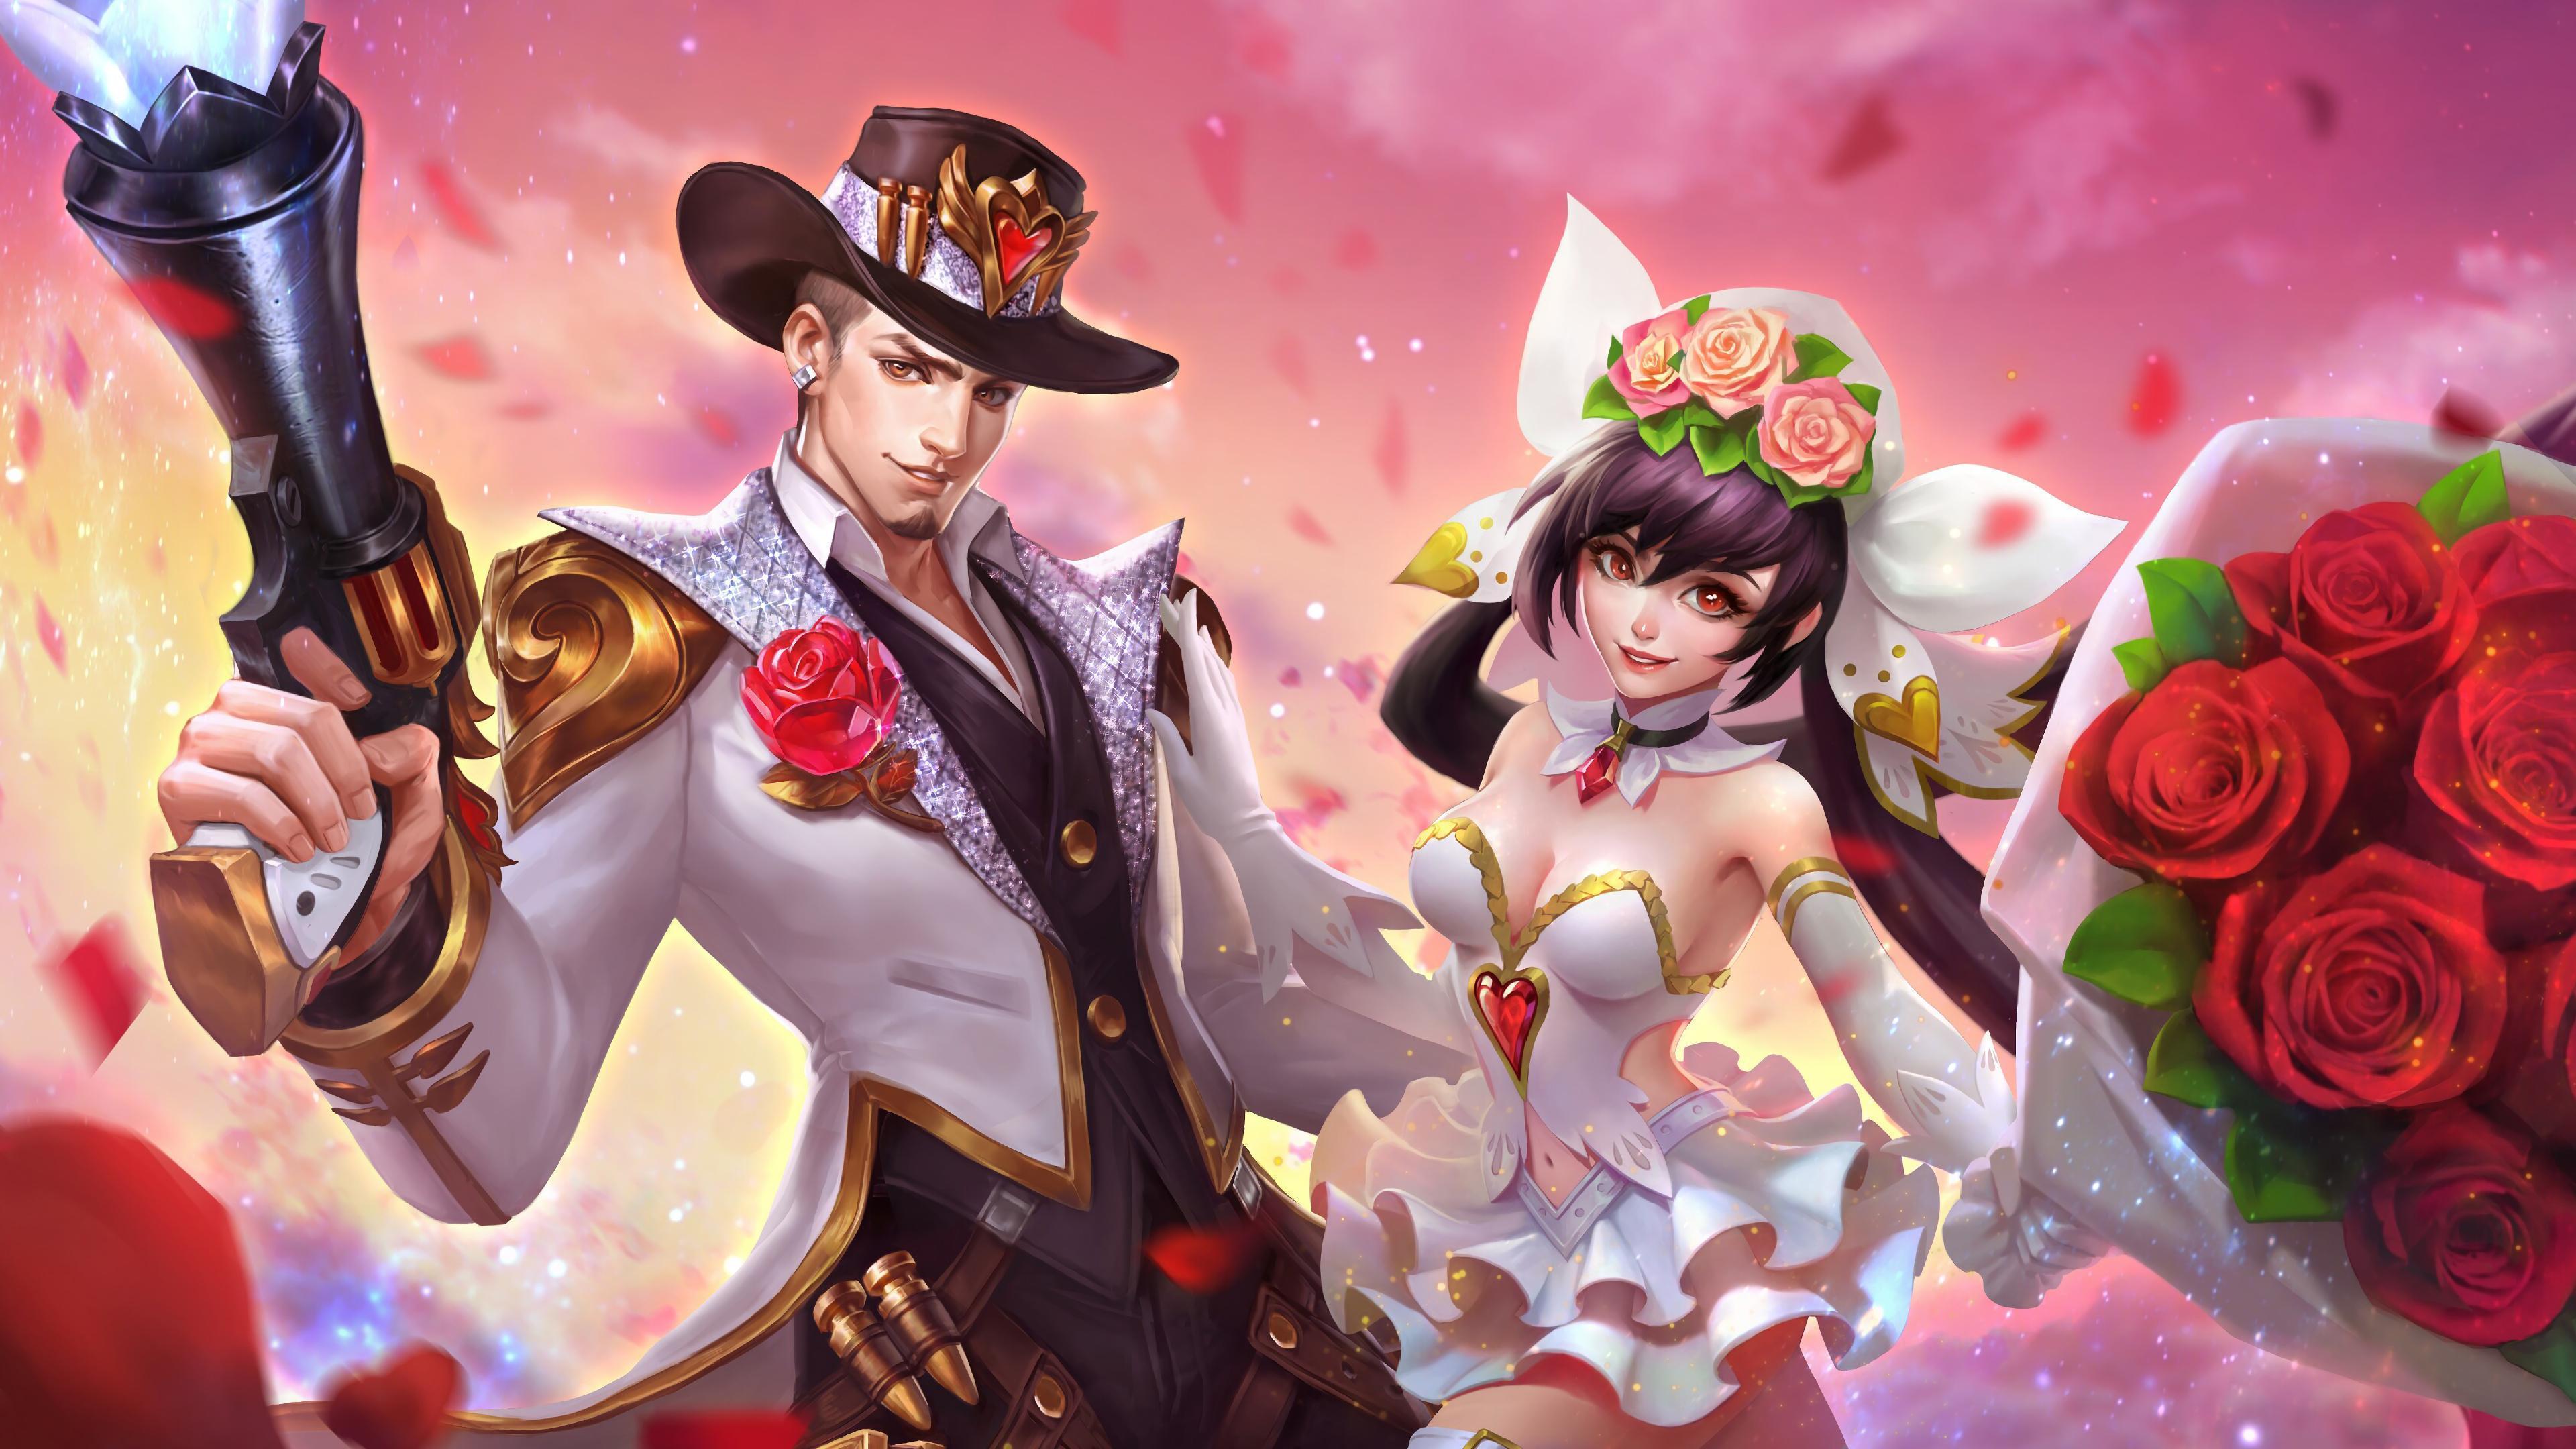 HD wallpaper, Layla, Skins, Gun And Roses, Cannon And Roses, 4K, Mobile Legends, Clint